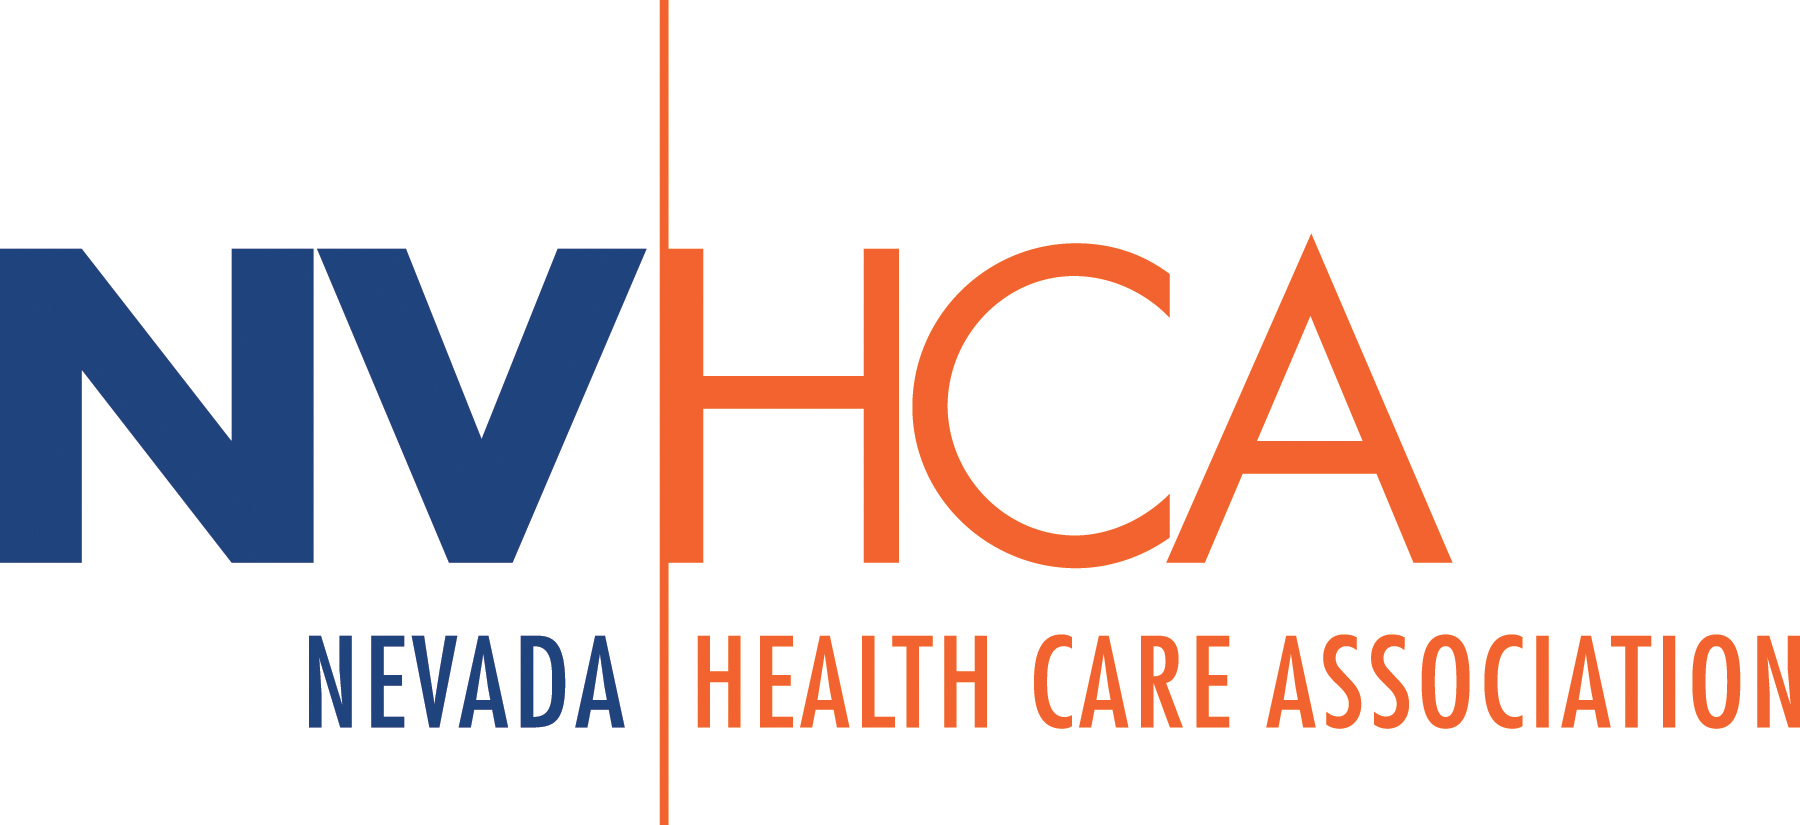 The Nevada Health Care Association (NVHCA), is urging state lawmakers to approve an interim legislative study that could improve funding and care.